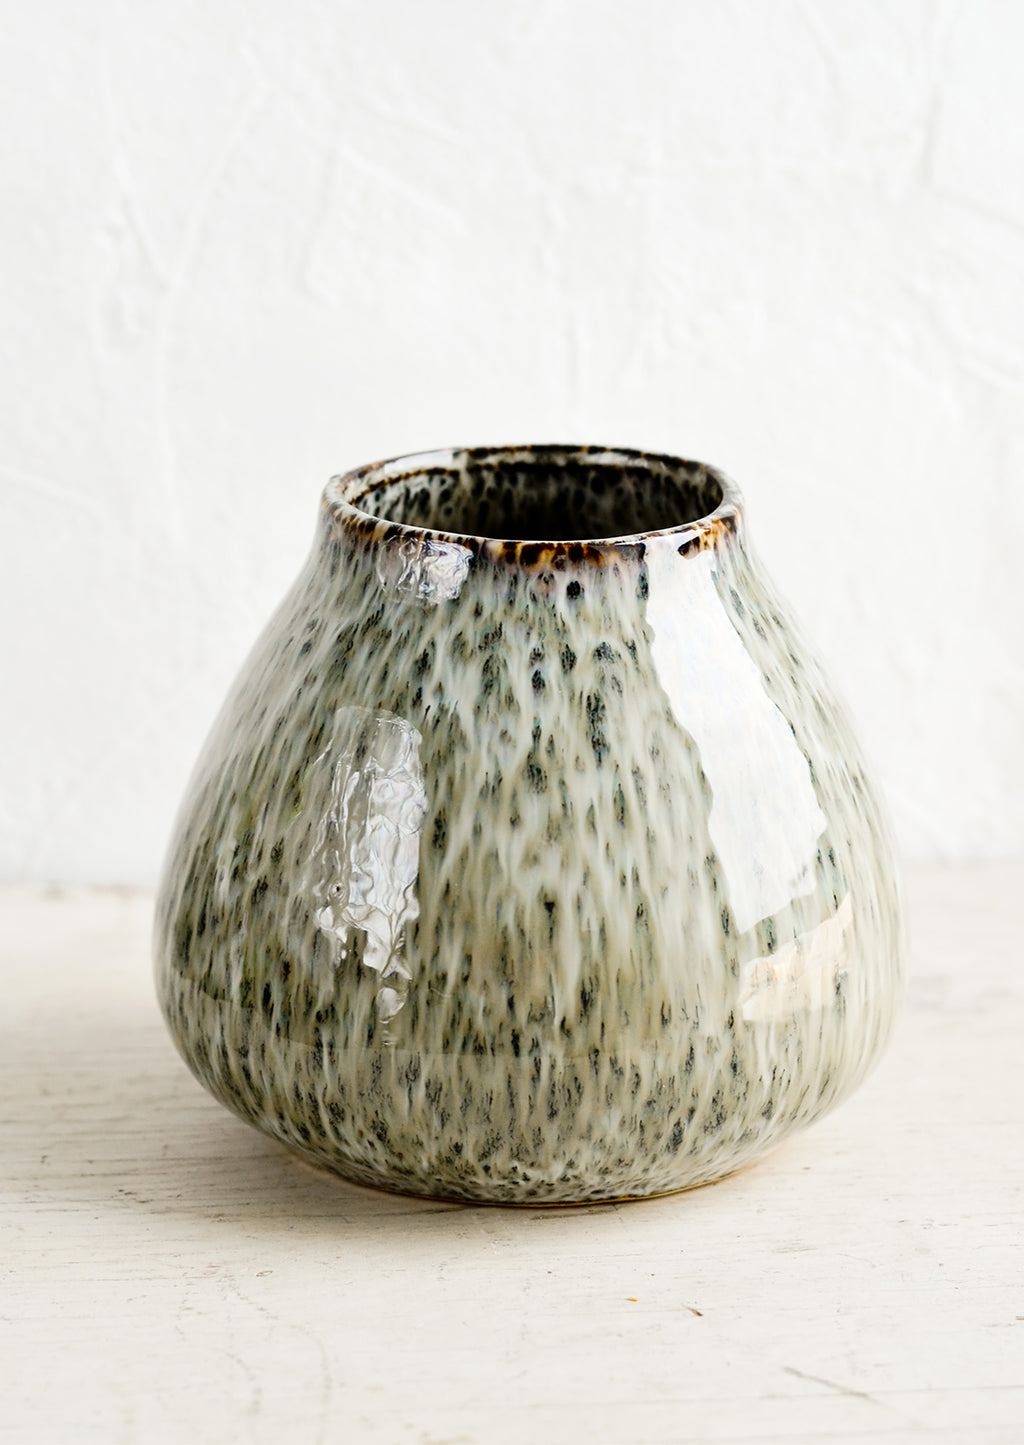 1: A round vase in glossy, speckled green glaze with a tapered opening.